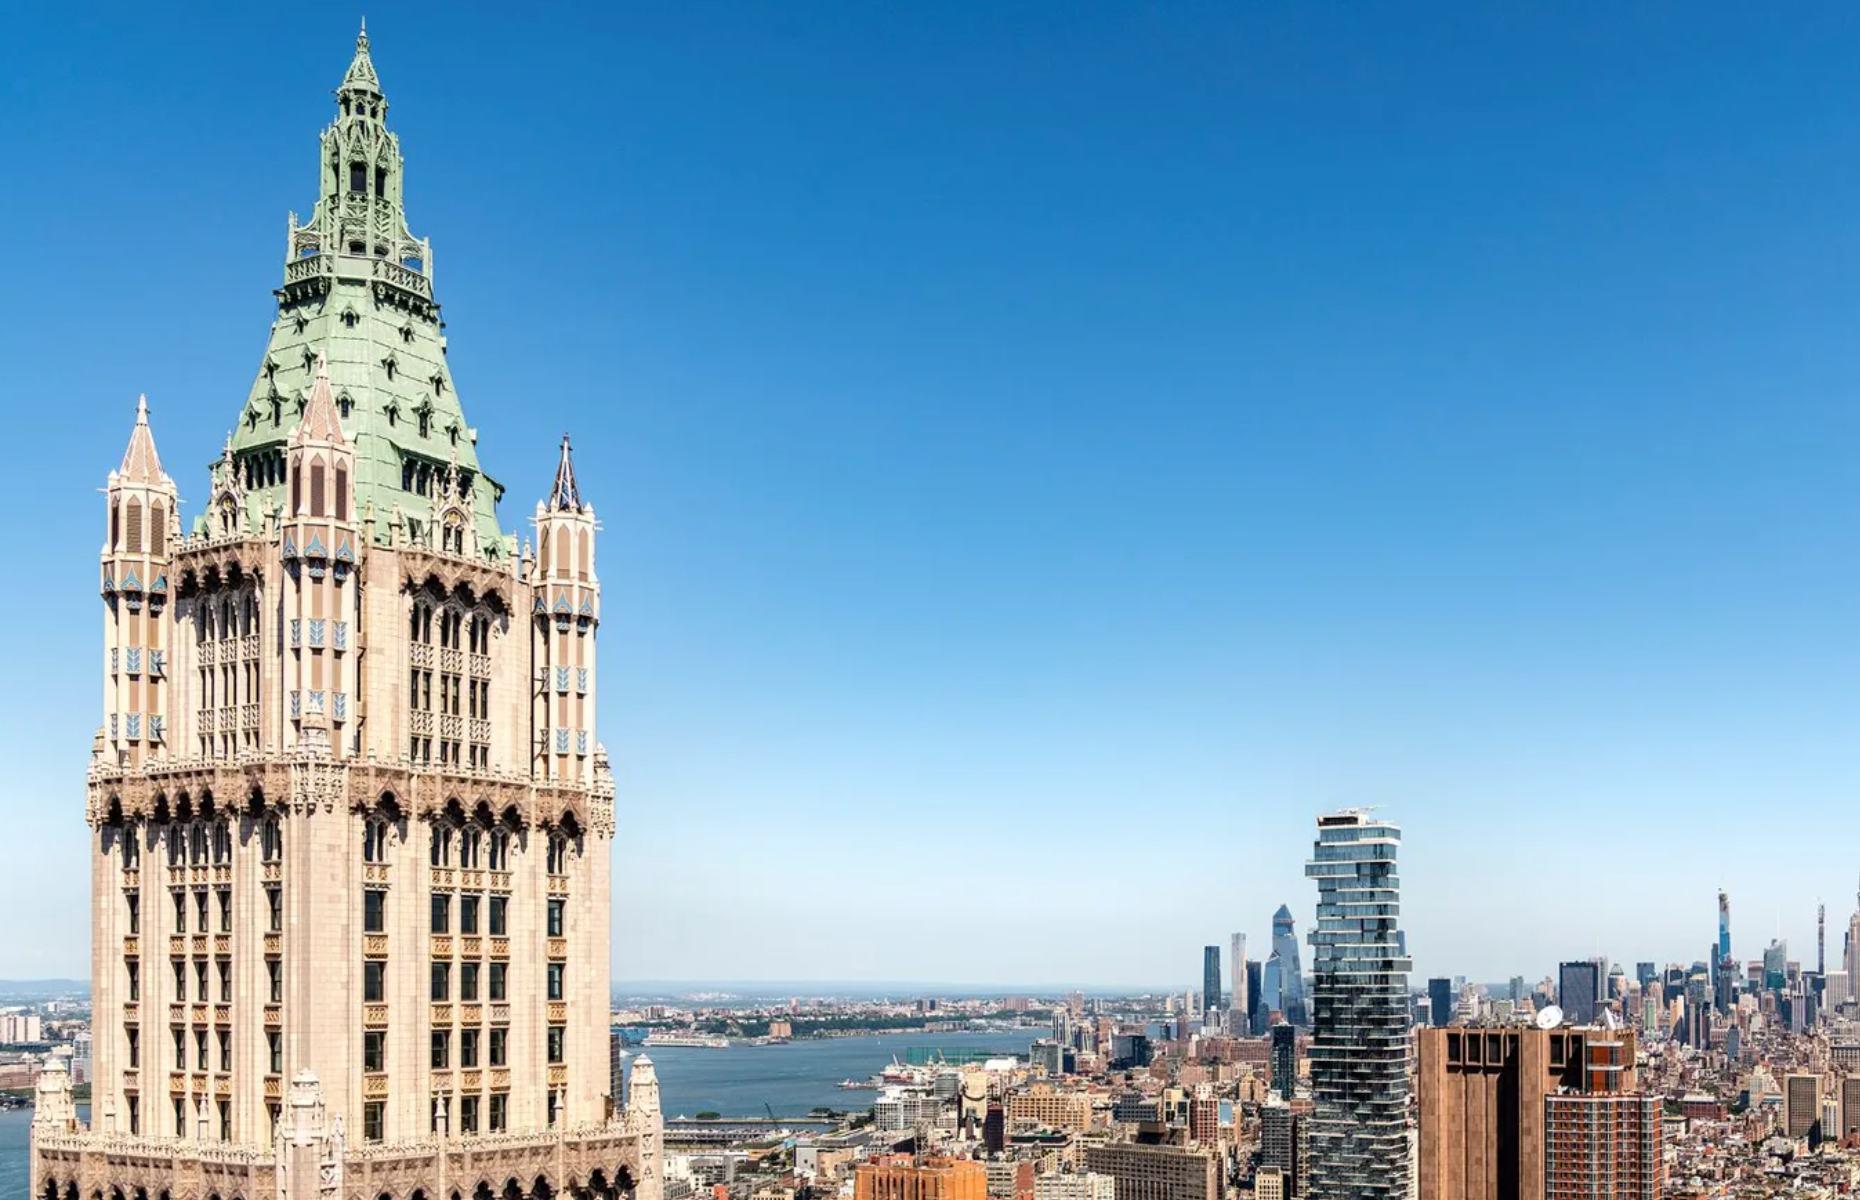 <p>The <a href="https://www.realtor.com/realestateandhomes-detail/2-Park-Pl-Ph-And_New-York_NY_10007_M99673-60328">Pinnacle Penthouse</a> lies at the top of the iconic Woolworth Building, in the heart of Tribeca, New York. The property landed <a href="https://www.townandcountrymag.com/leisure/real-estate/a13131305/woolworth-building-penthouse/?utm_source=google&utm_medium=cpc&utm_campaign=arb_ga_toc_md_pmx_us_urlx&gclid=Cj0KCQjw7KqZBhCBARIsAI-fTKKHbYOsD2tM0i1wqNUxNTAtJEPvSSOUhyMa1wvXWQYWxN_ovxO">on the market</a> in 2017, with a $110 million asking price. At the time, it was among the most expensive listings New York City had ever seen. After six years and countless price cuts, one lucky buyer finally snapped the place up in summer 2023, paying just $30 million. That's a staggering $80 million less than the original asking price. The lack of interest might have had something to do with the fact that the interior of the penthouse isn't even finished.  </p>